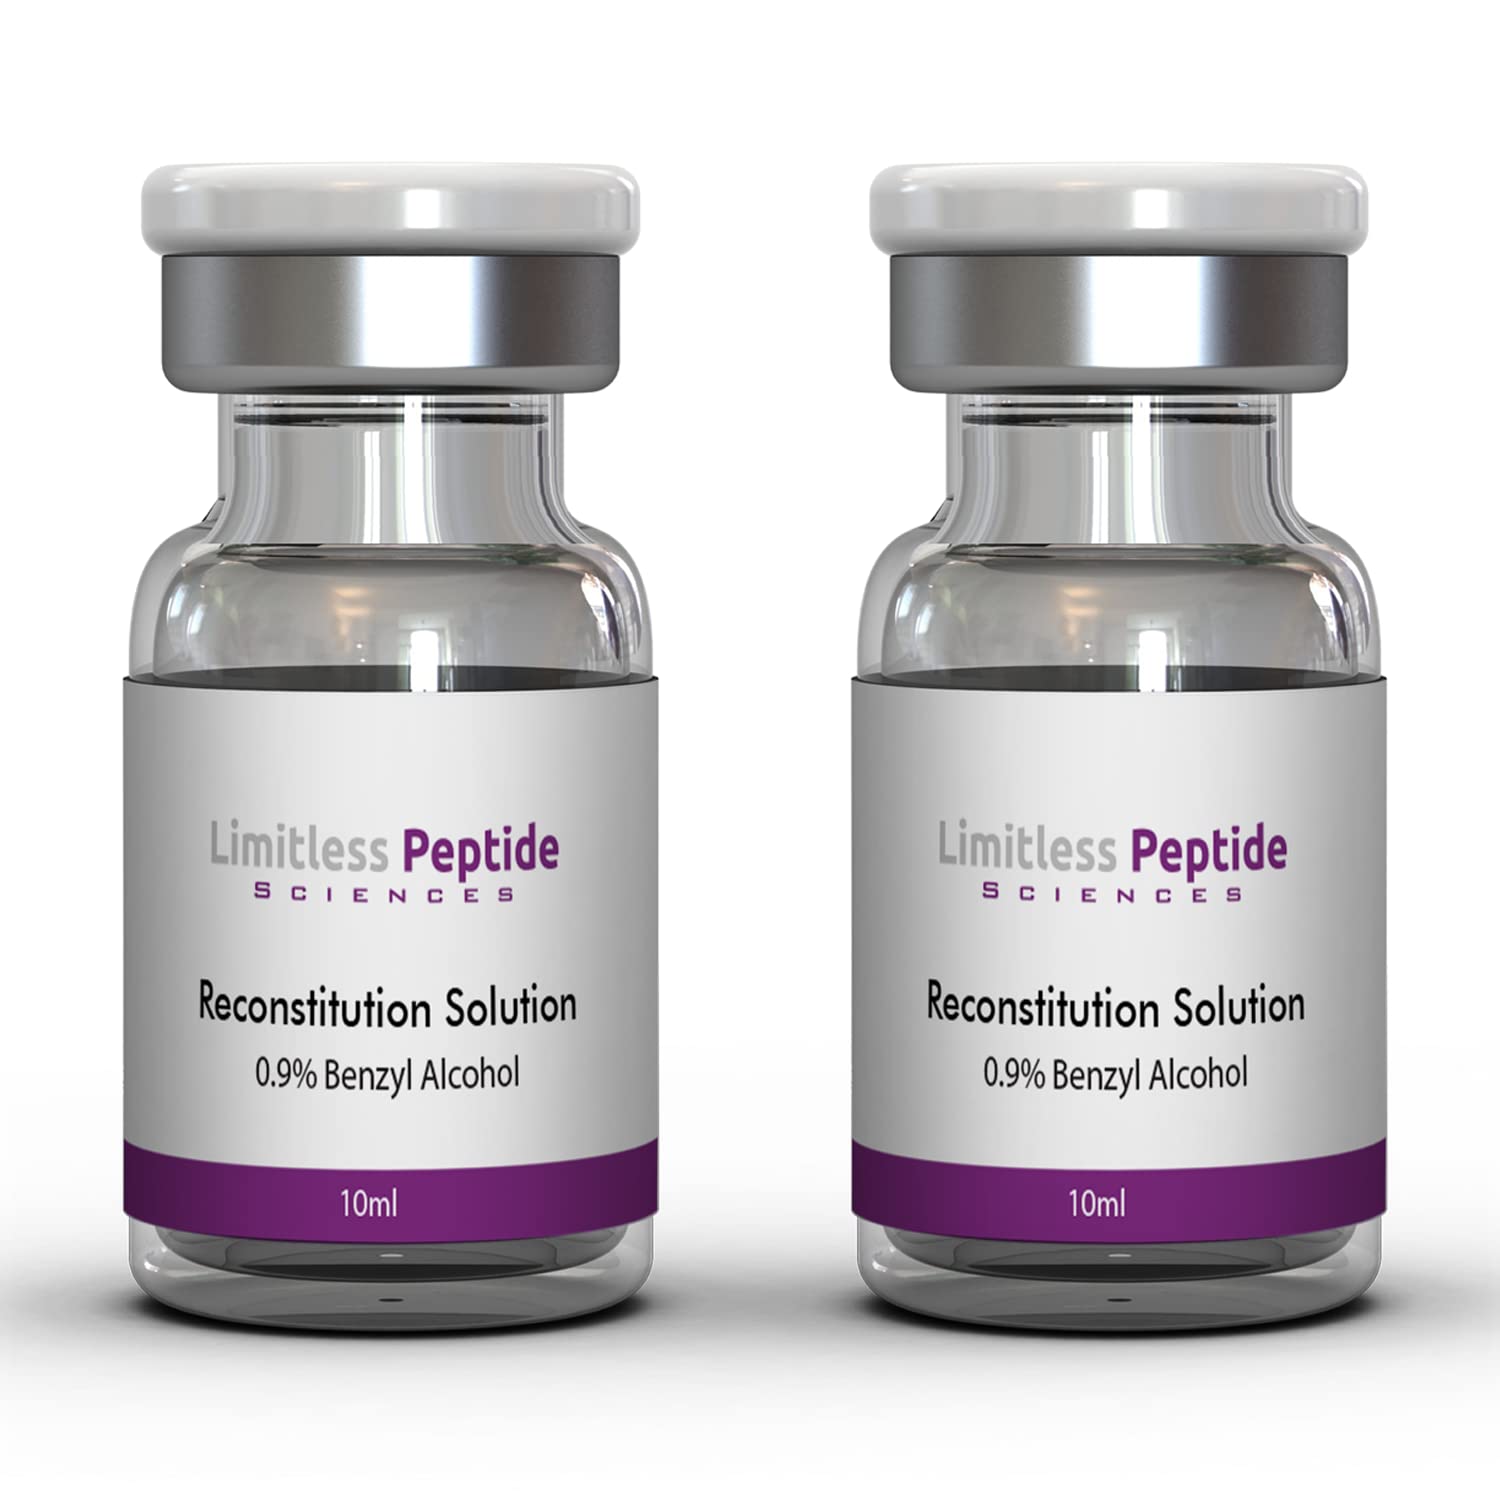 How To Store Reconstituted Peptides